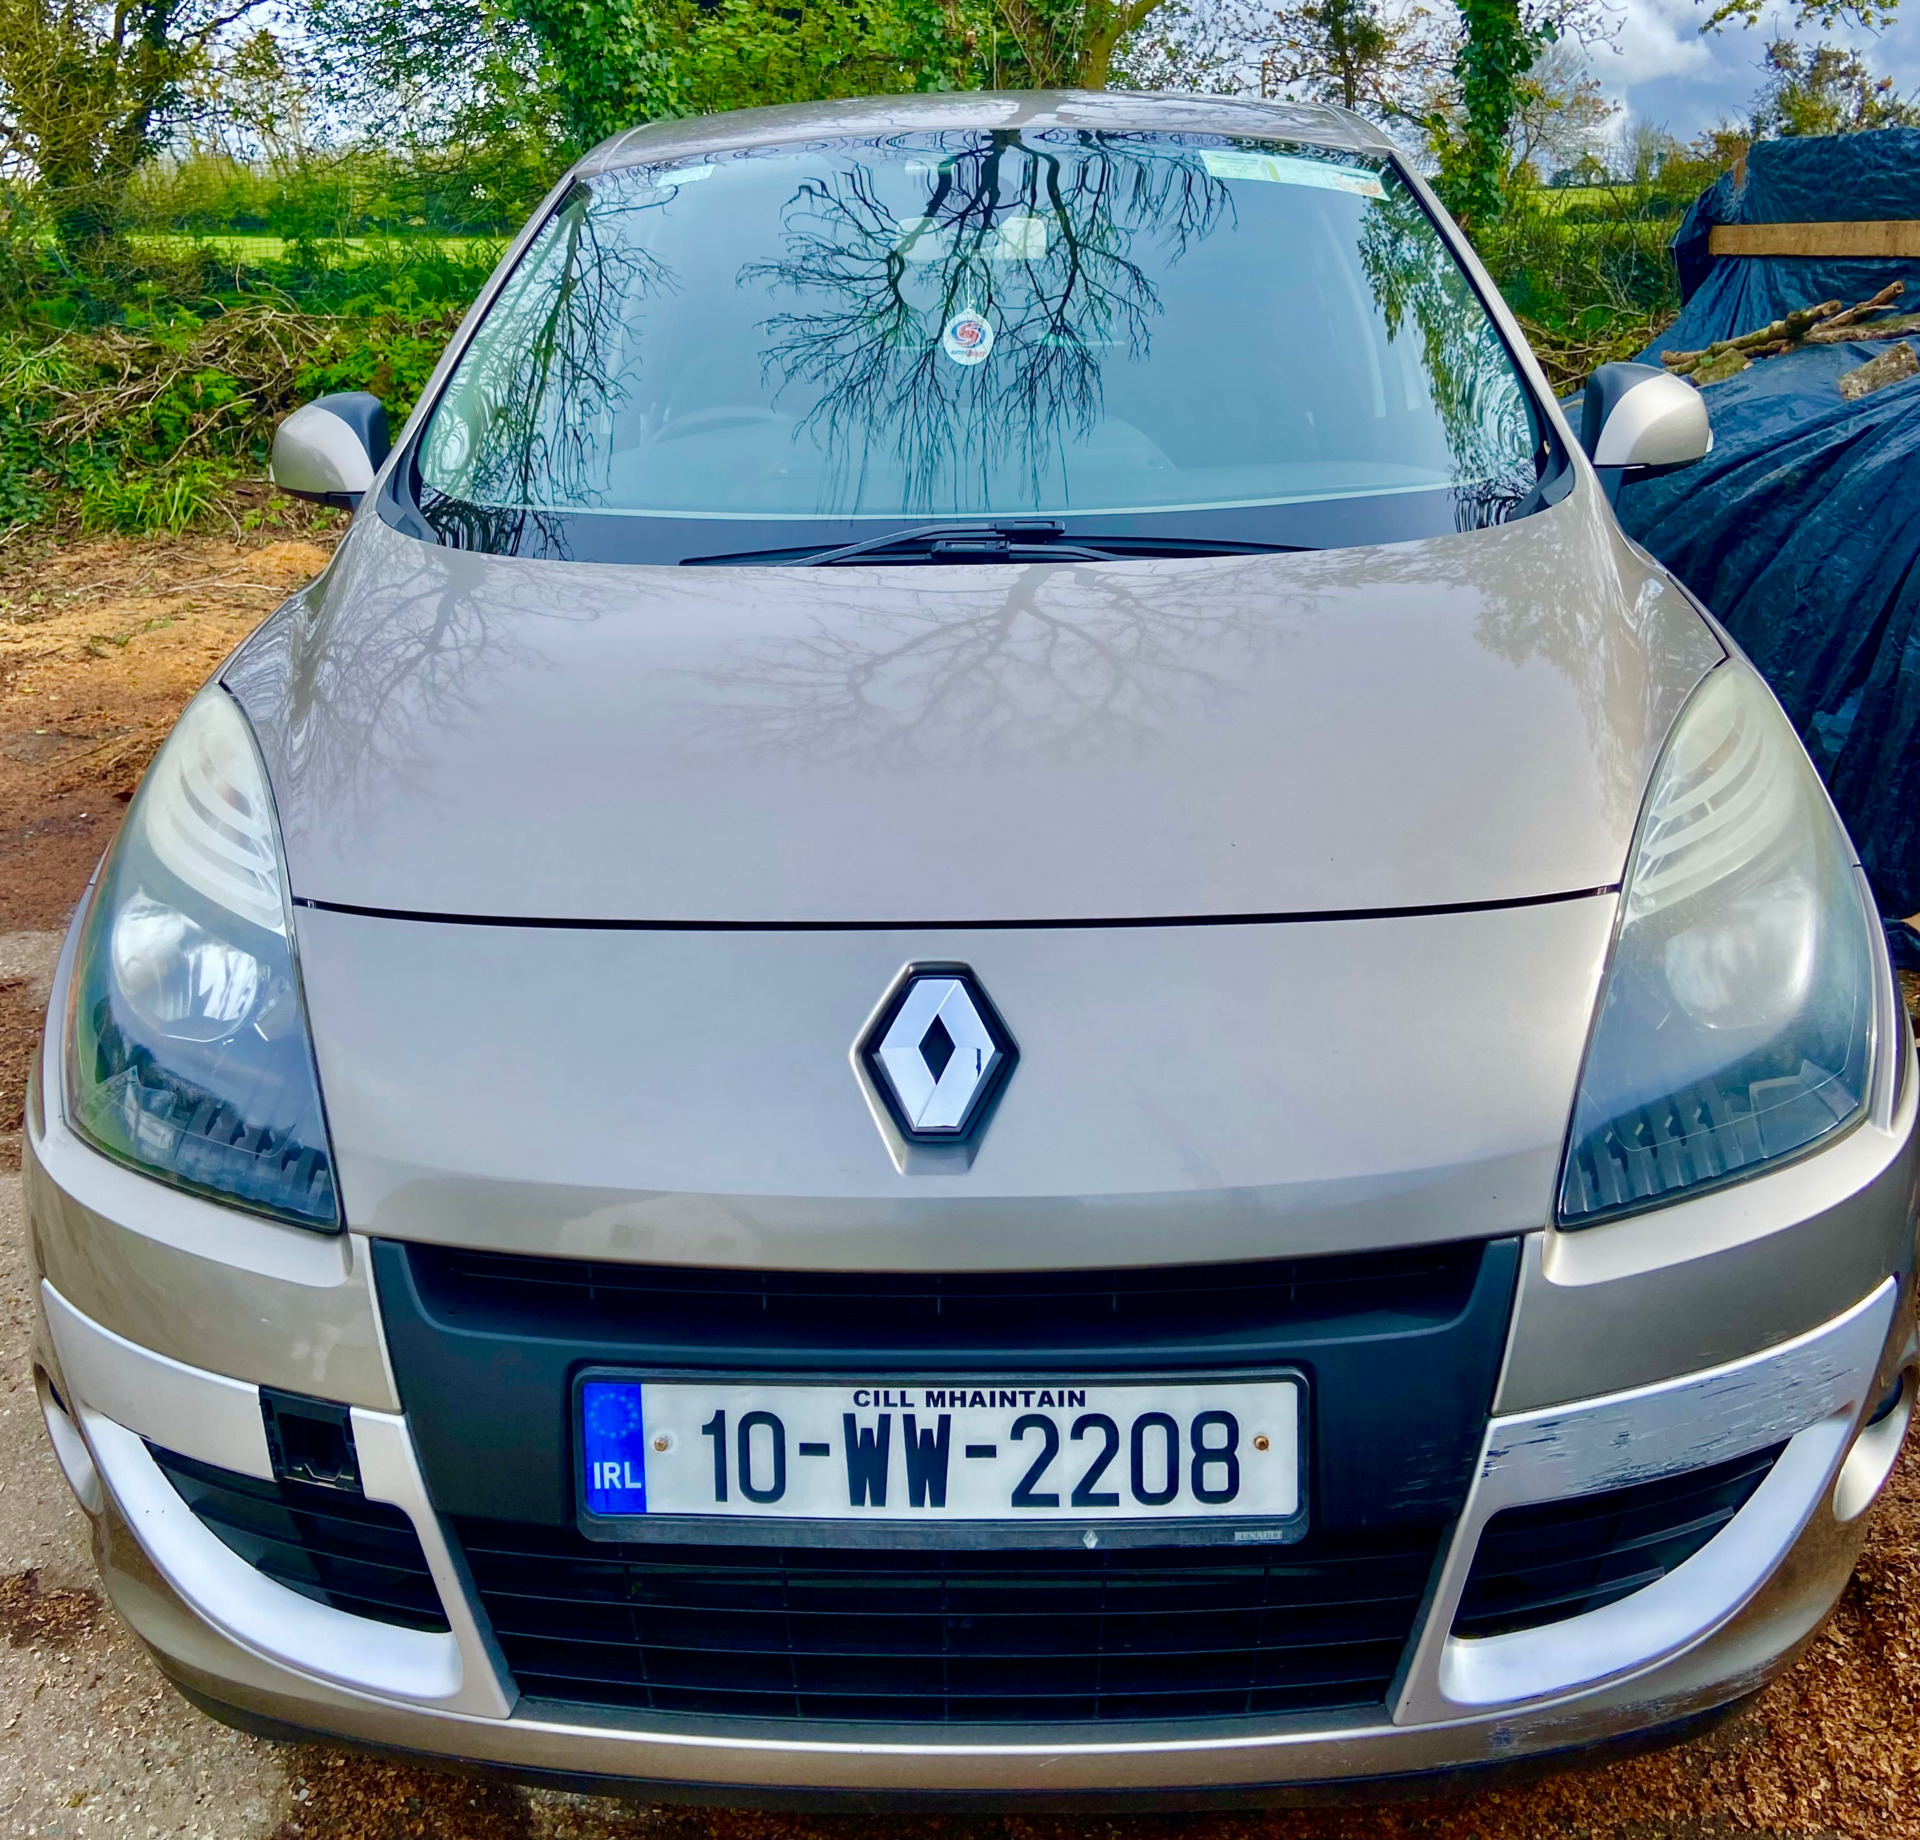 Used Renault Scenic 2010 in Wexford